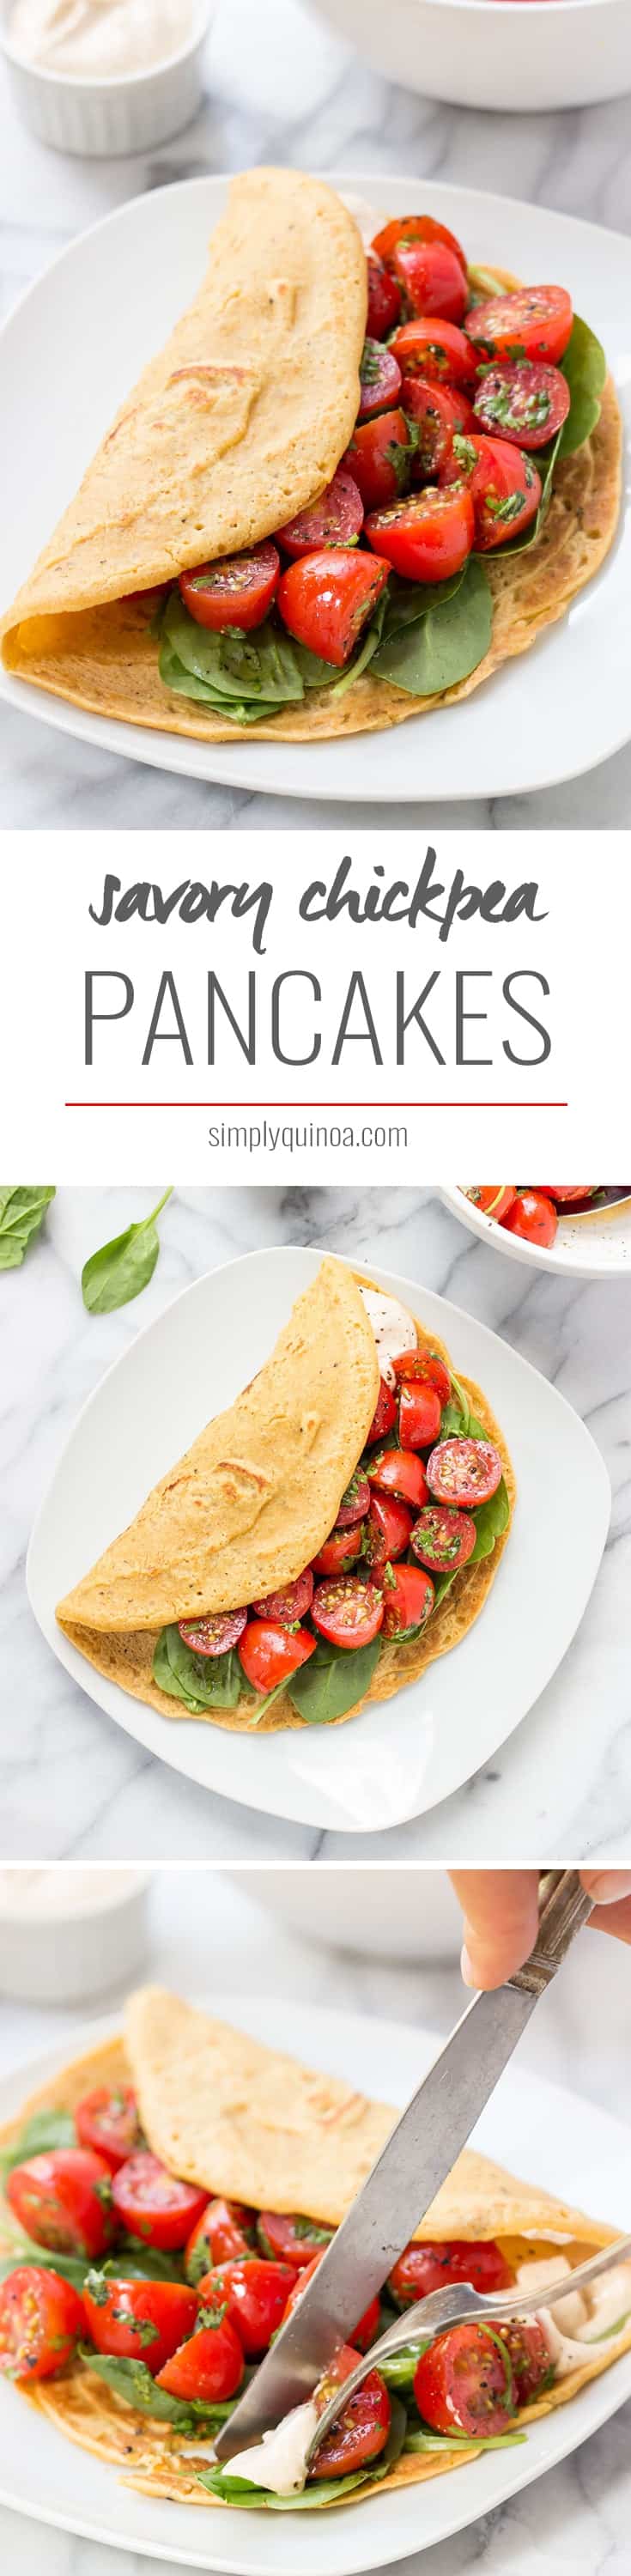 These simple savory chickpea pancakes are SO EASY, taste amazing and are packed with protein!